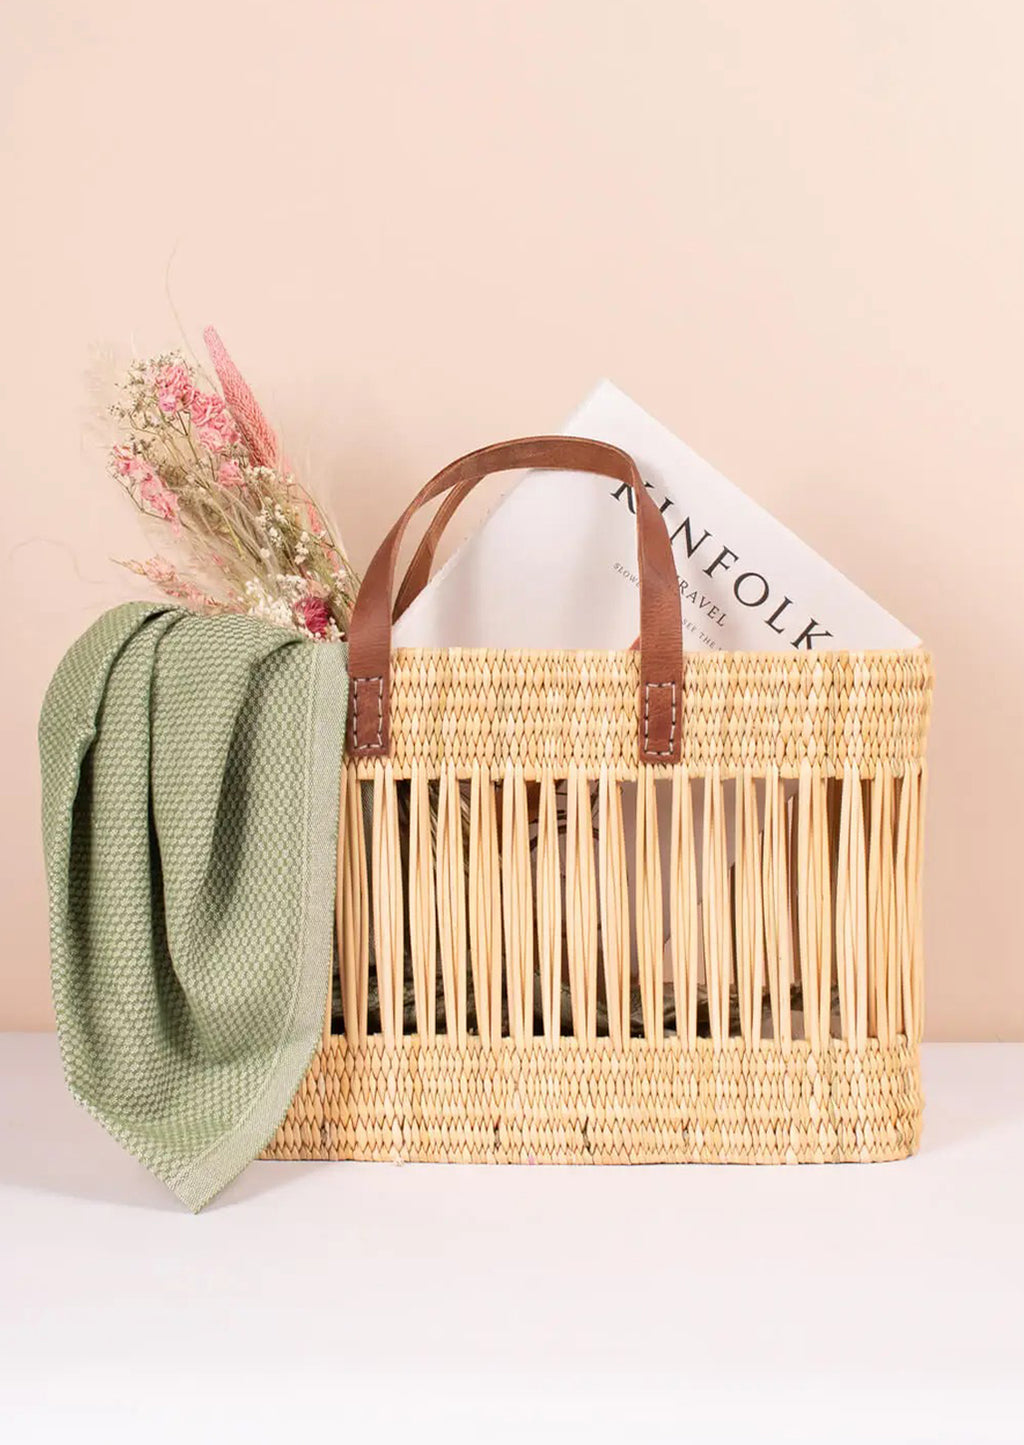 2: A tote-shaped woven reed basket with open air design, brown leather handles.